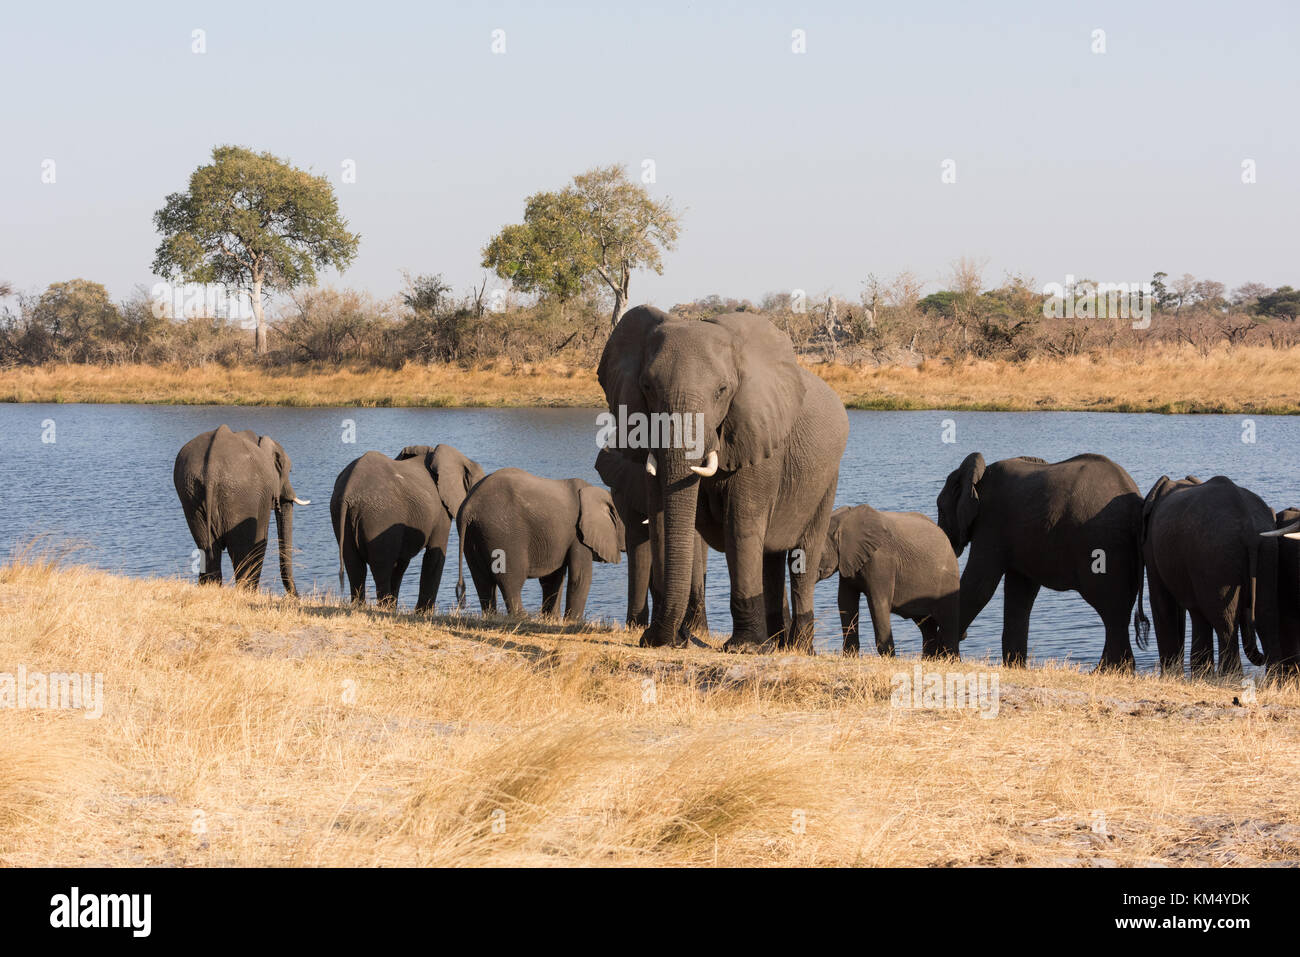 Large adult elephant (Loxodonta) stands guard in front of other elephants drinking in river Bwabwata National Park, Namibia Stock Photo